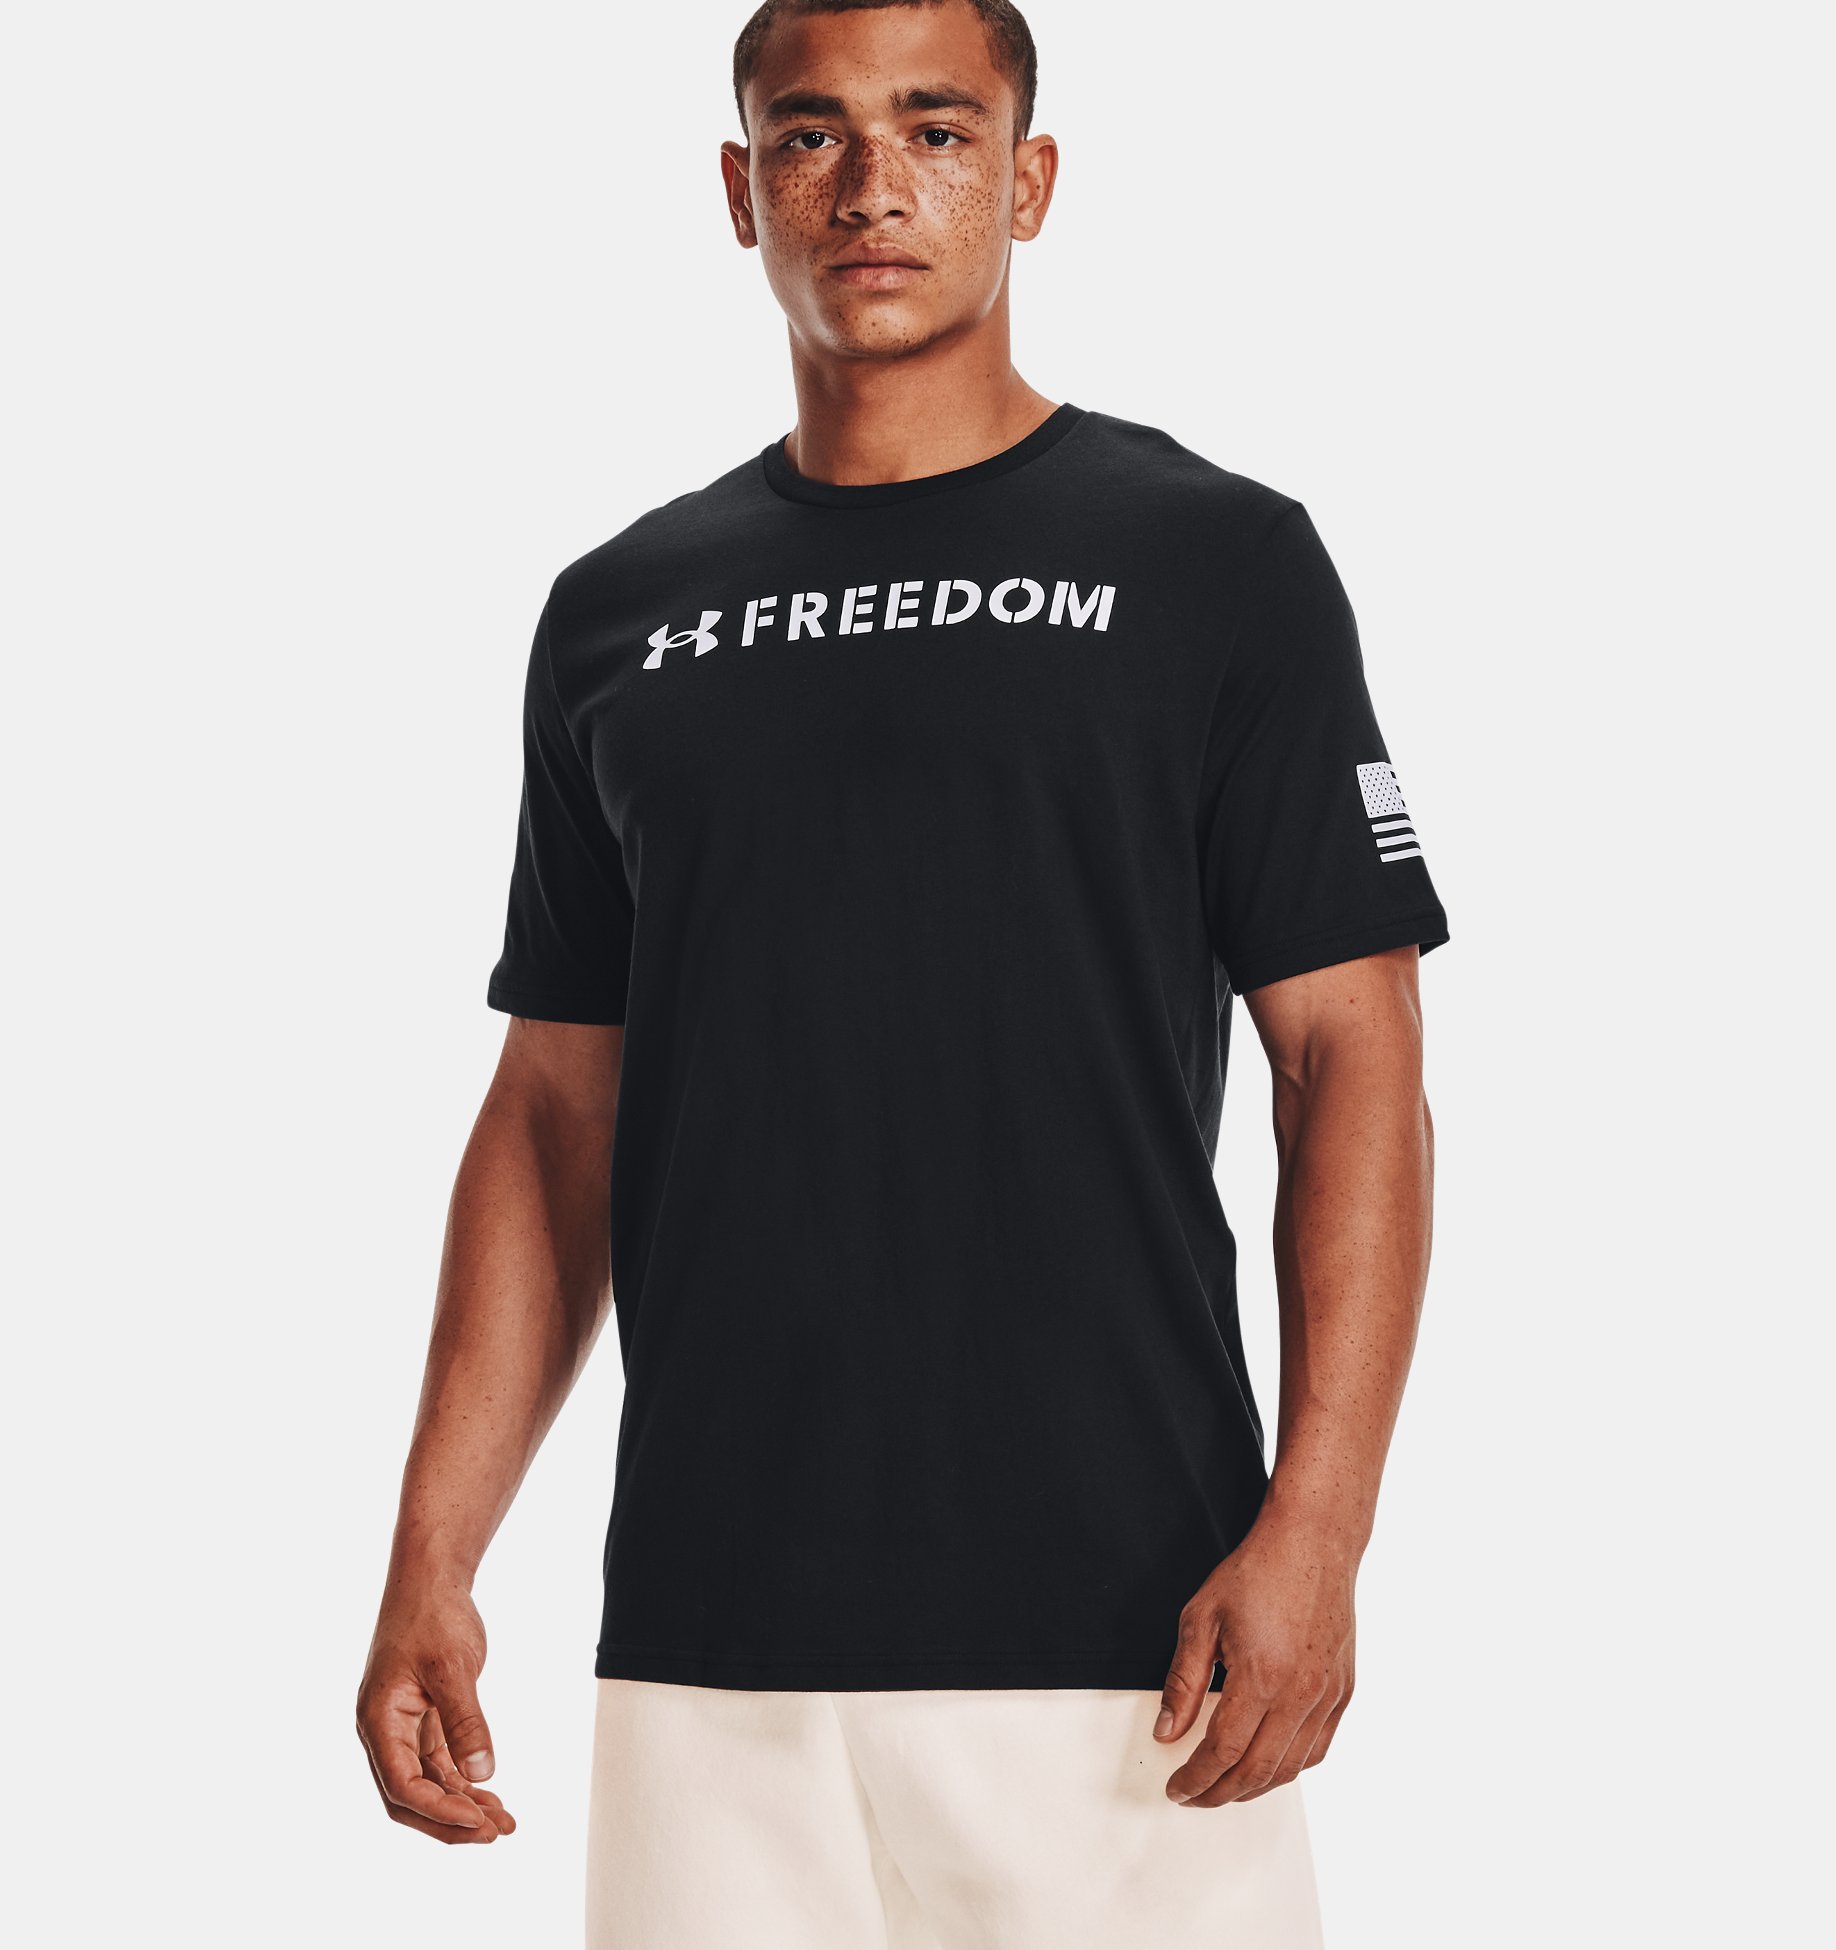 Under Armour Men's New Freedom Flag Bold T-Shirt 